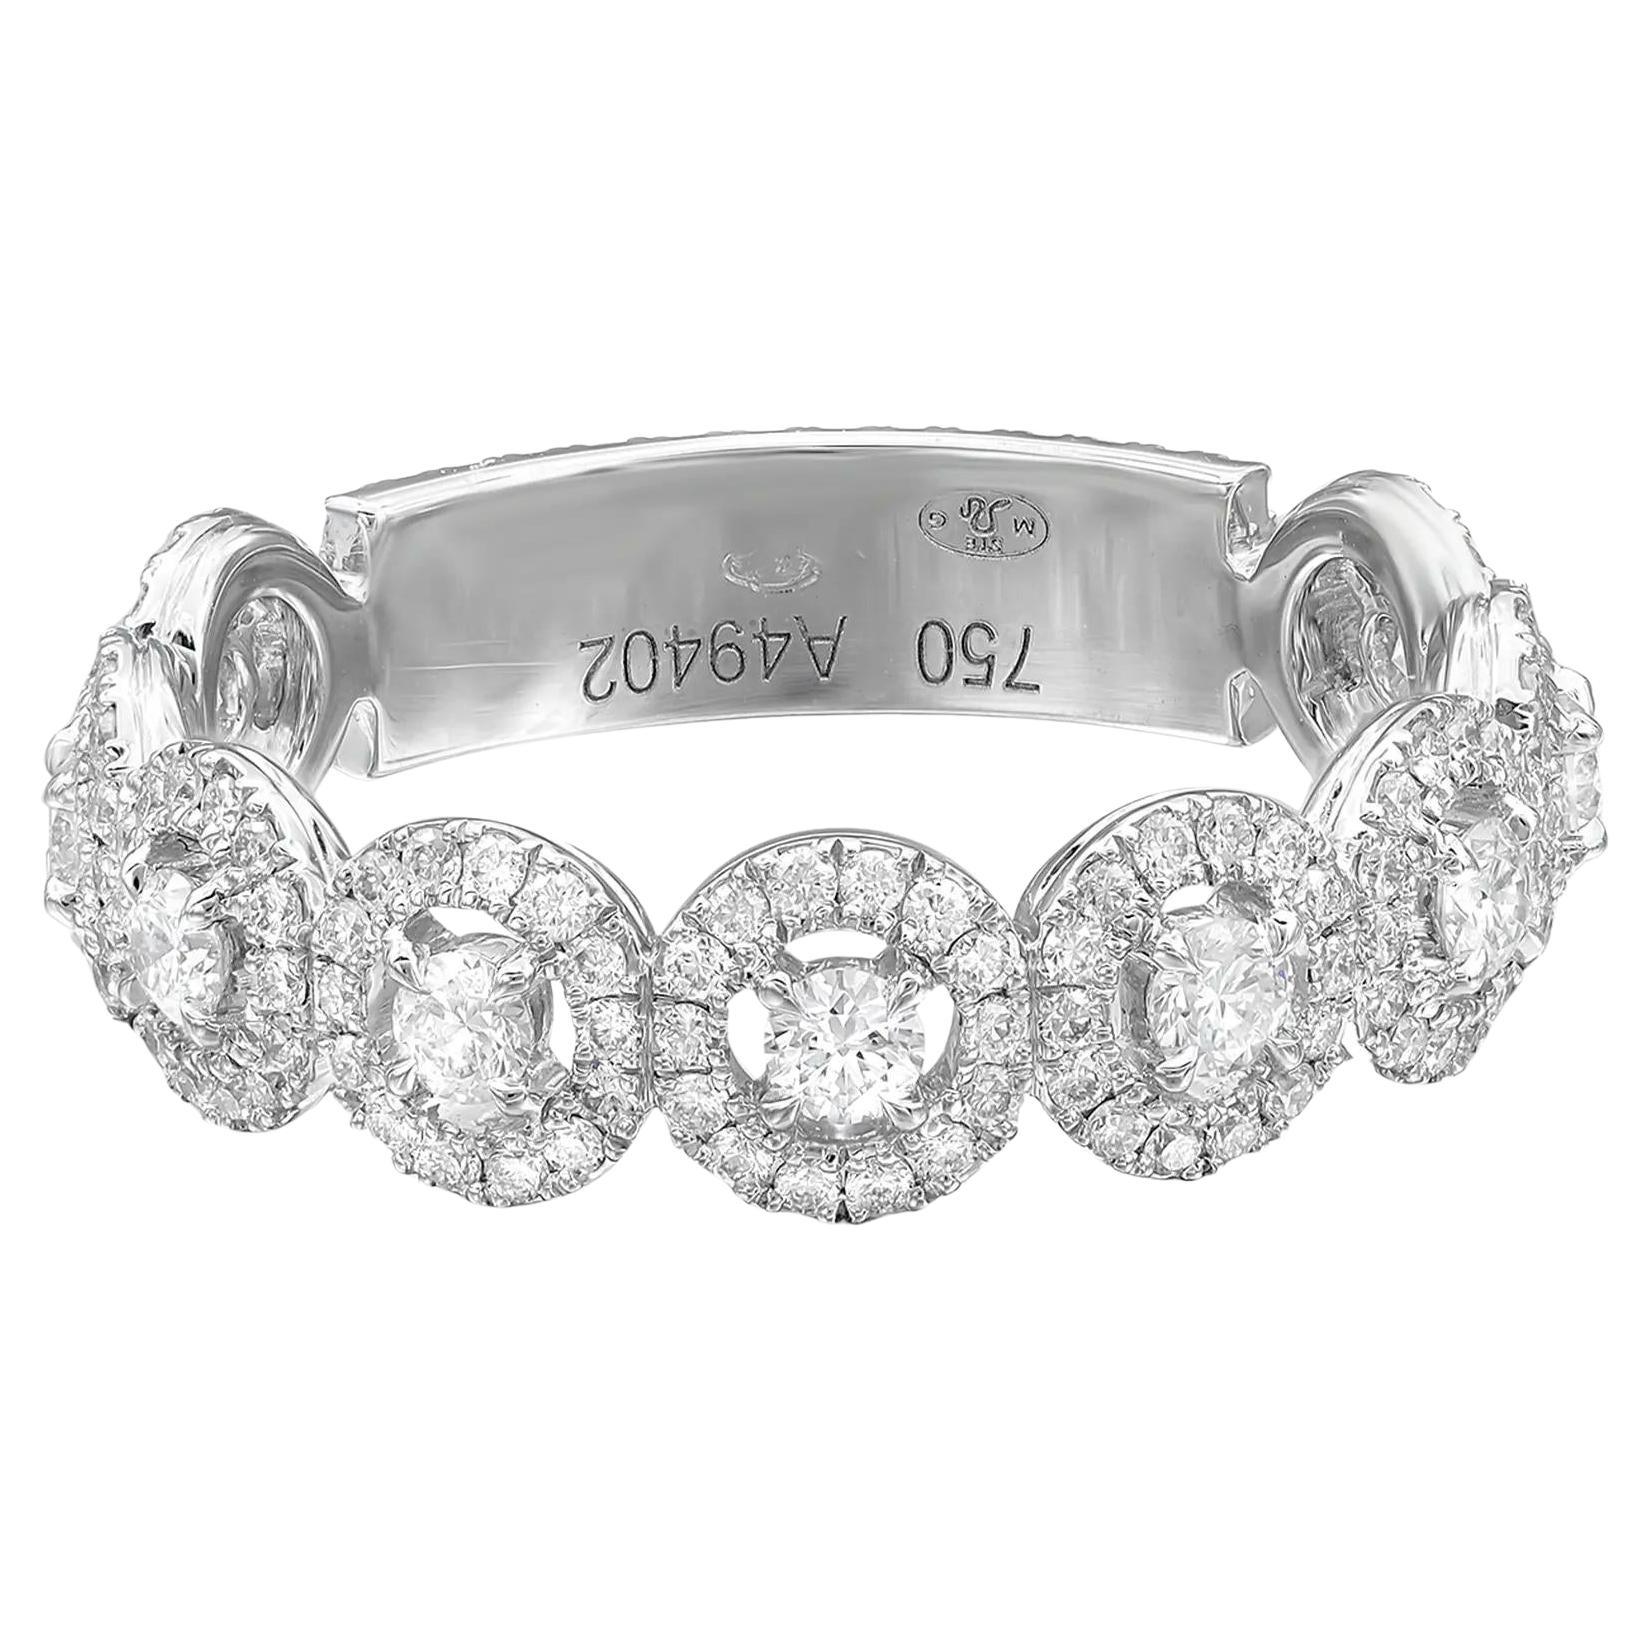 Messika 0.91Cttw All Joy Diamond Band Ring 18K White Gold Size 56 US 7.75  For Sale